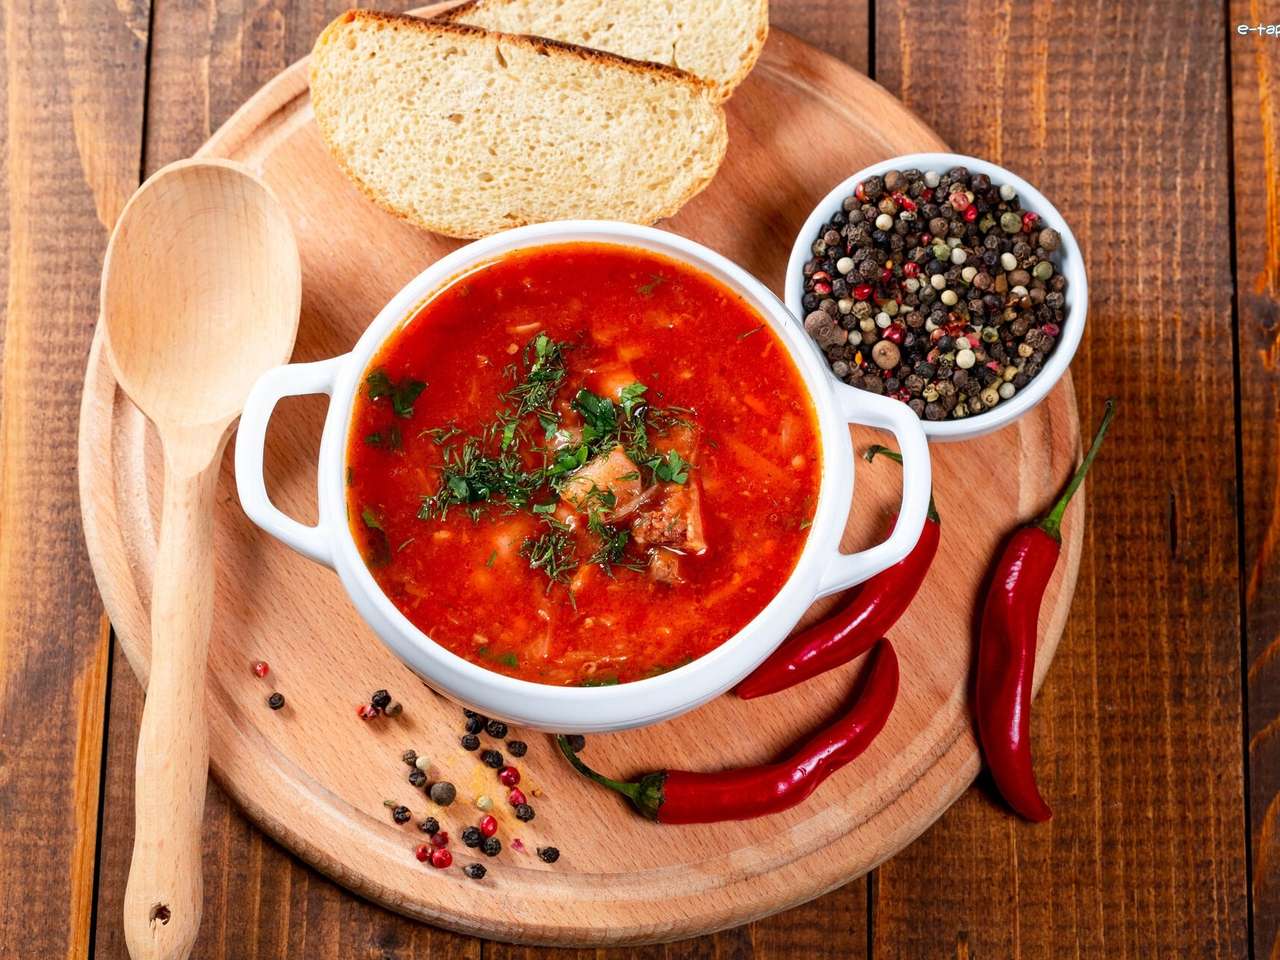 Suppe, Chili, Brot Online-Puzzle